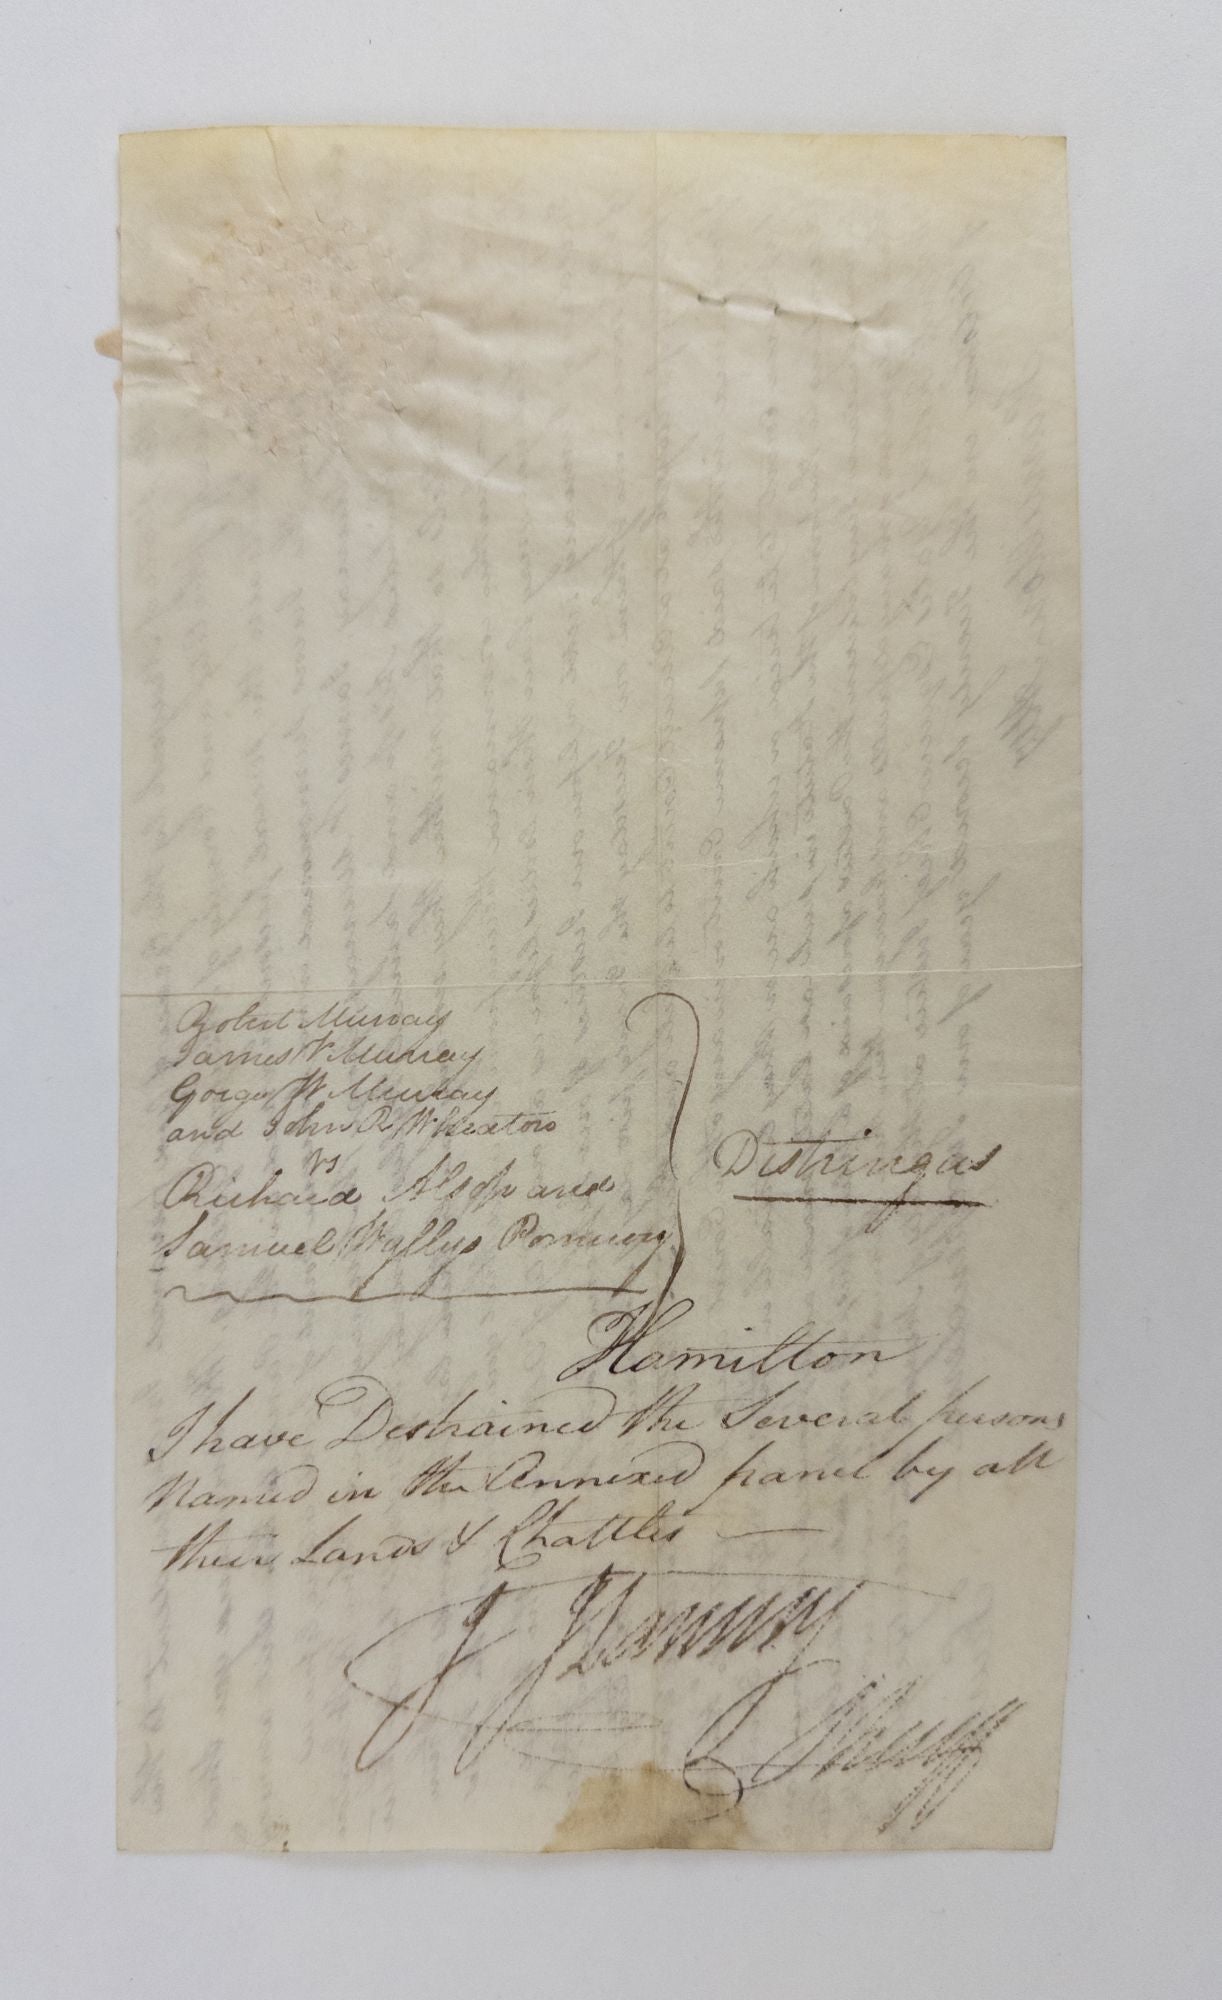 Product Image for COURT DOCUMENT FROM THE LAW PRACTICE OF ALEXANDER HAMILTON (1798)